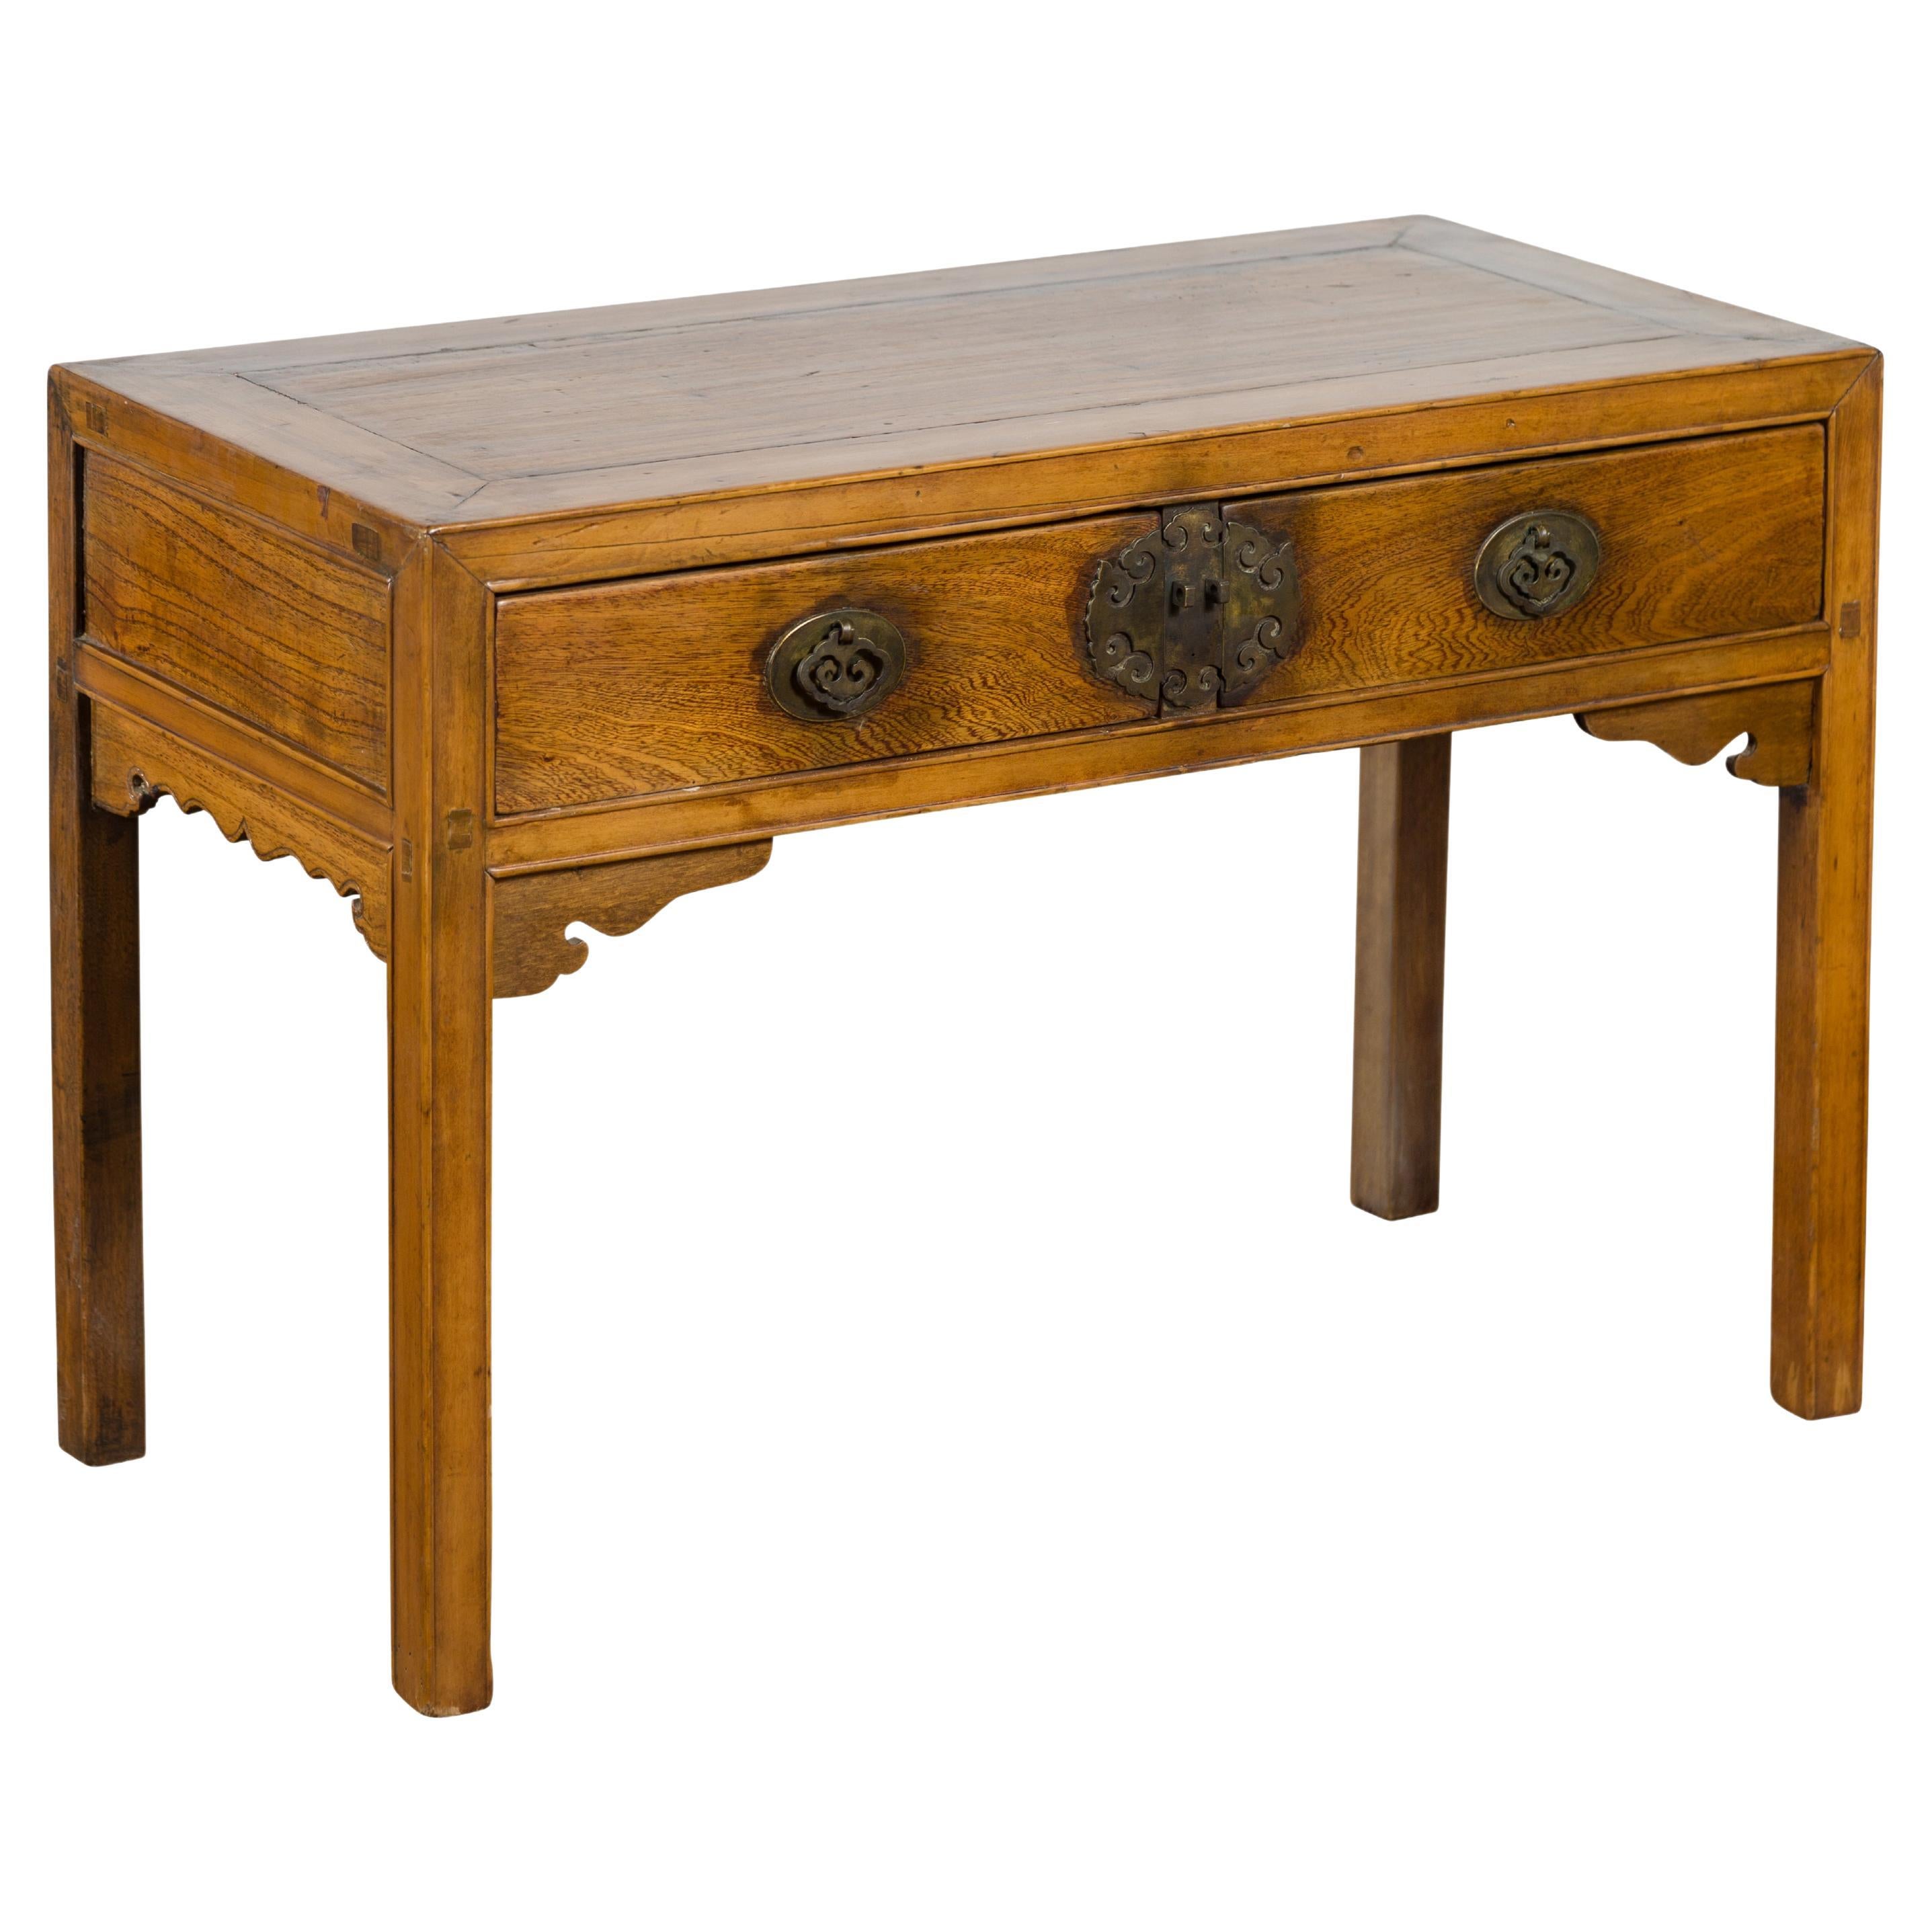 Chinese Late Qing Dynasty Elm Desk with Two Drawers and Ornate Brass Hardware For Sale